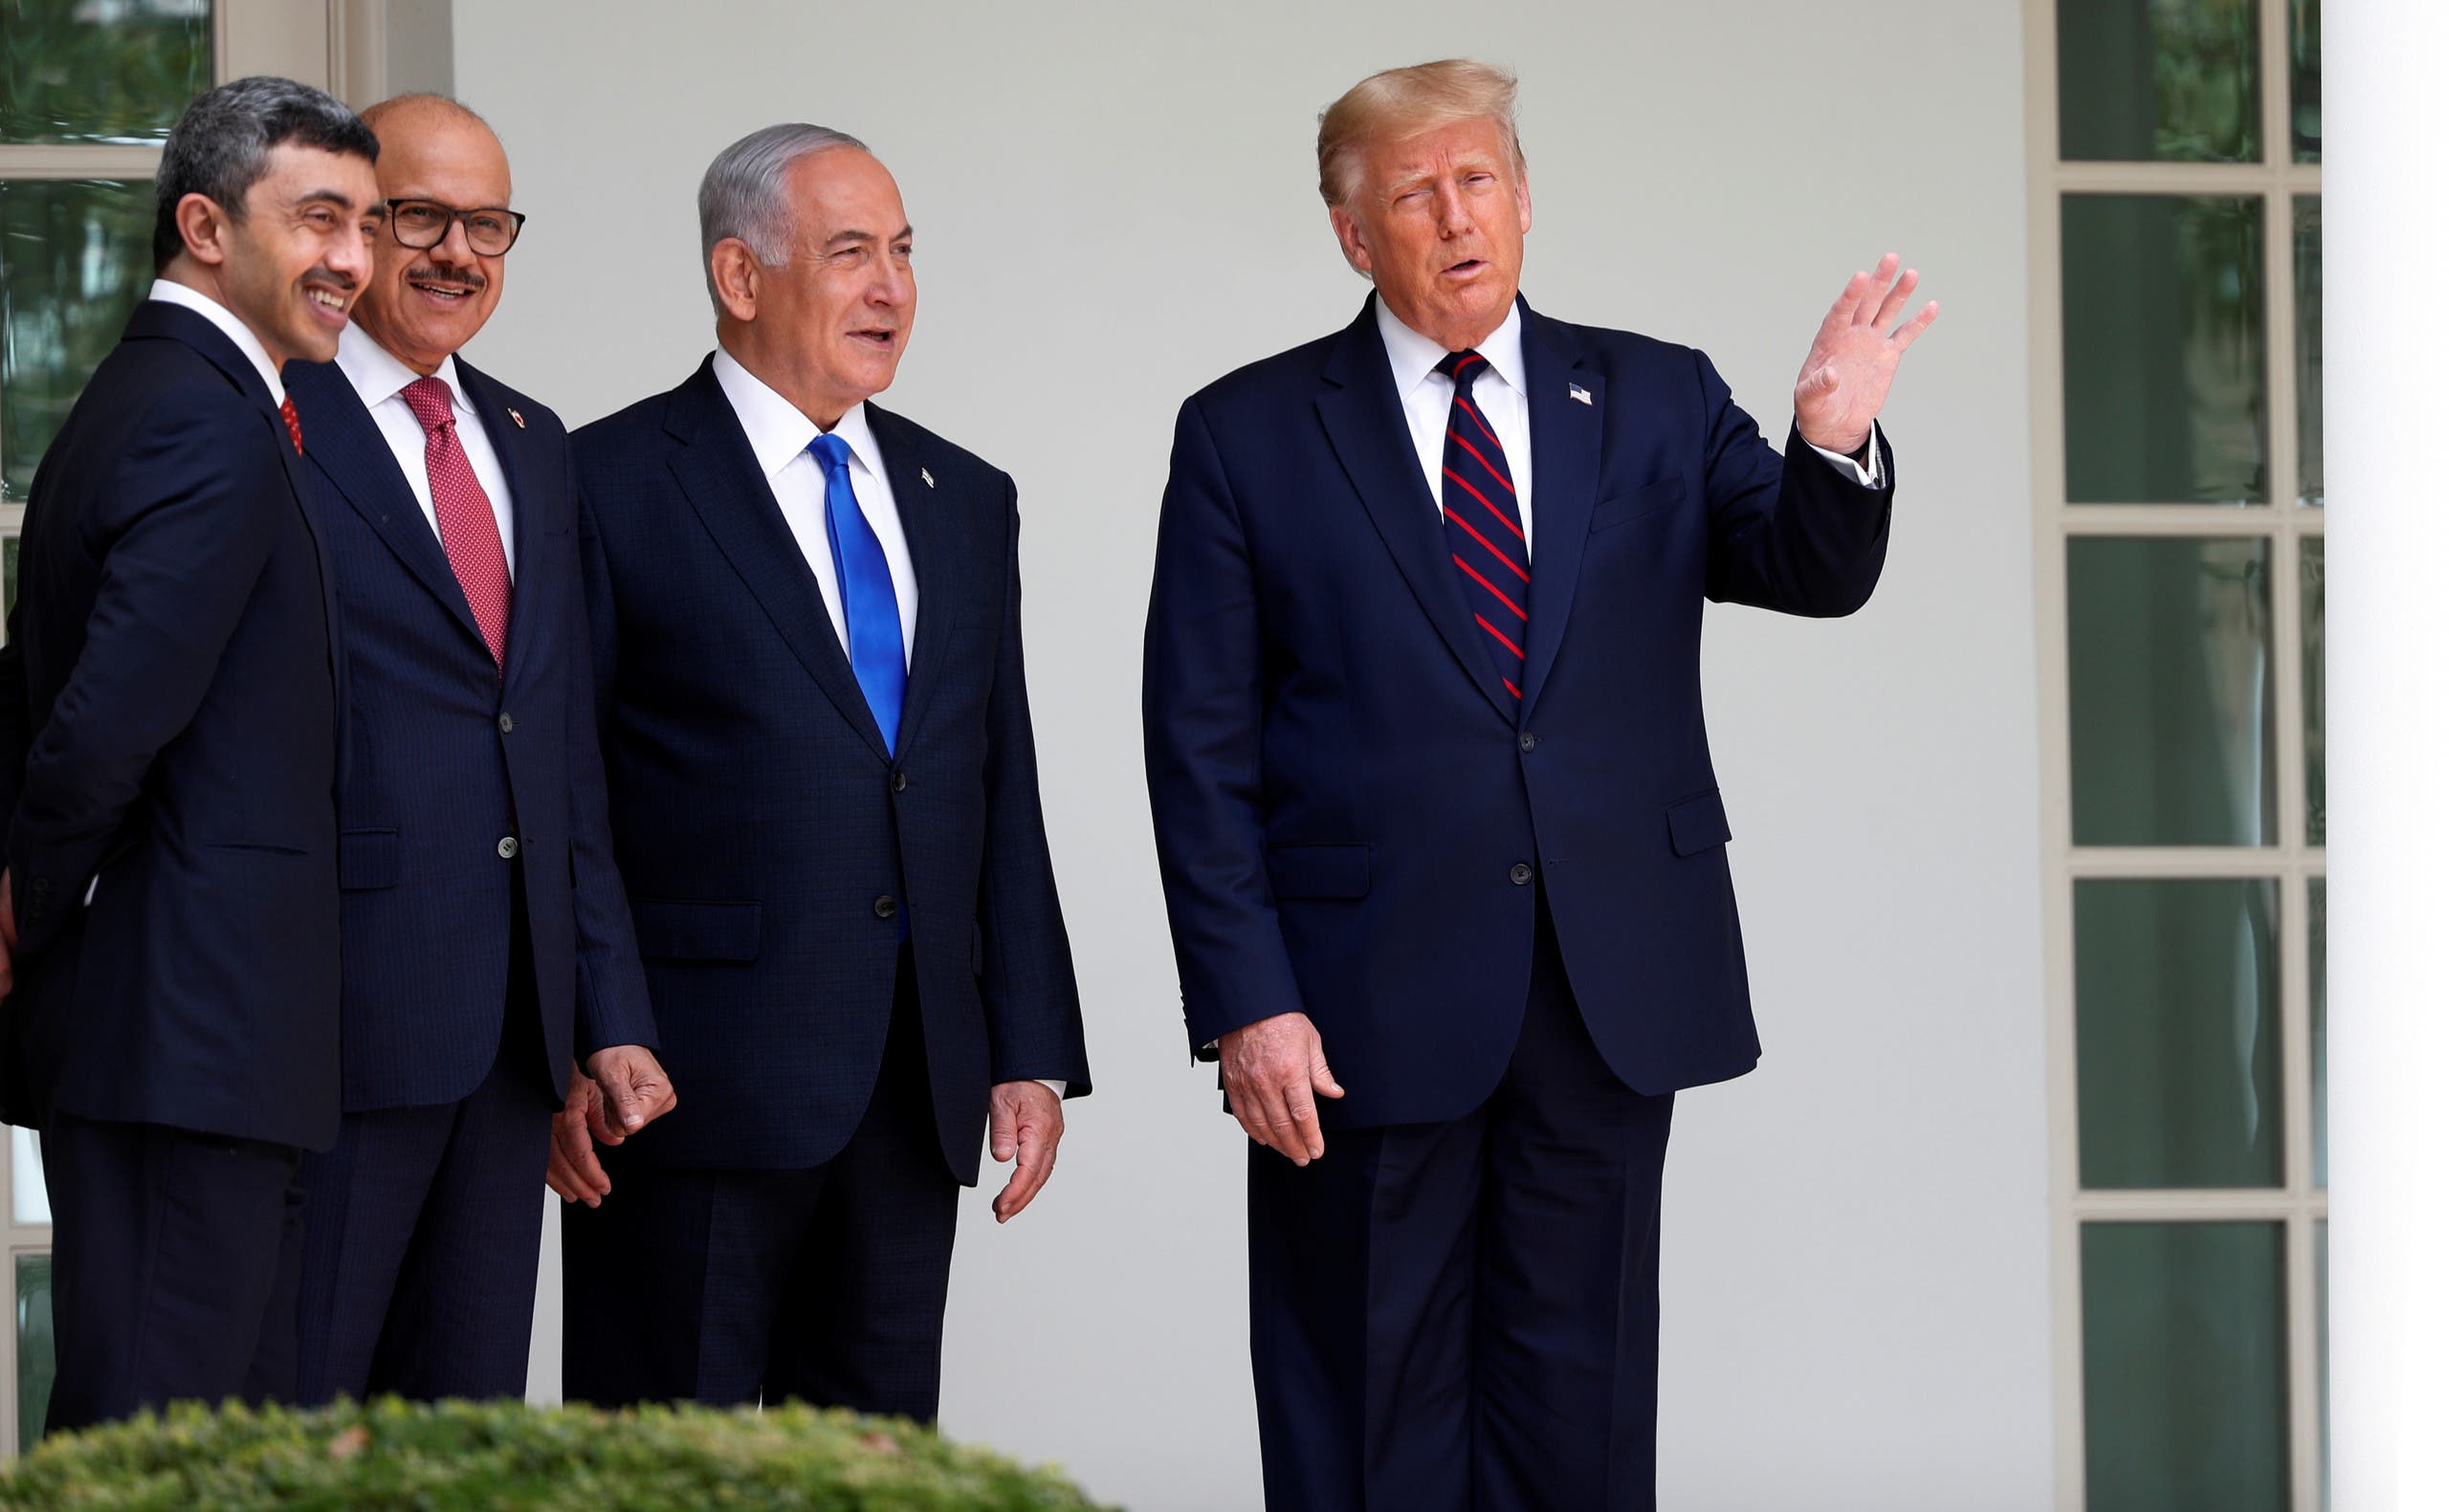 U.S. President Donald Trump talks with United Arab Emirates (UAE) Foreign Minister Abdullah bin Zayed, Bahrain's Foreign Minister Abdullatif Al Zayani and Israel's Prime Minister Benjamin Netanyahu as they stand together on the West Wing colonnade before the signing of the Abraham Accords (File photo: Reuters)